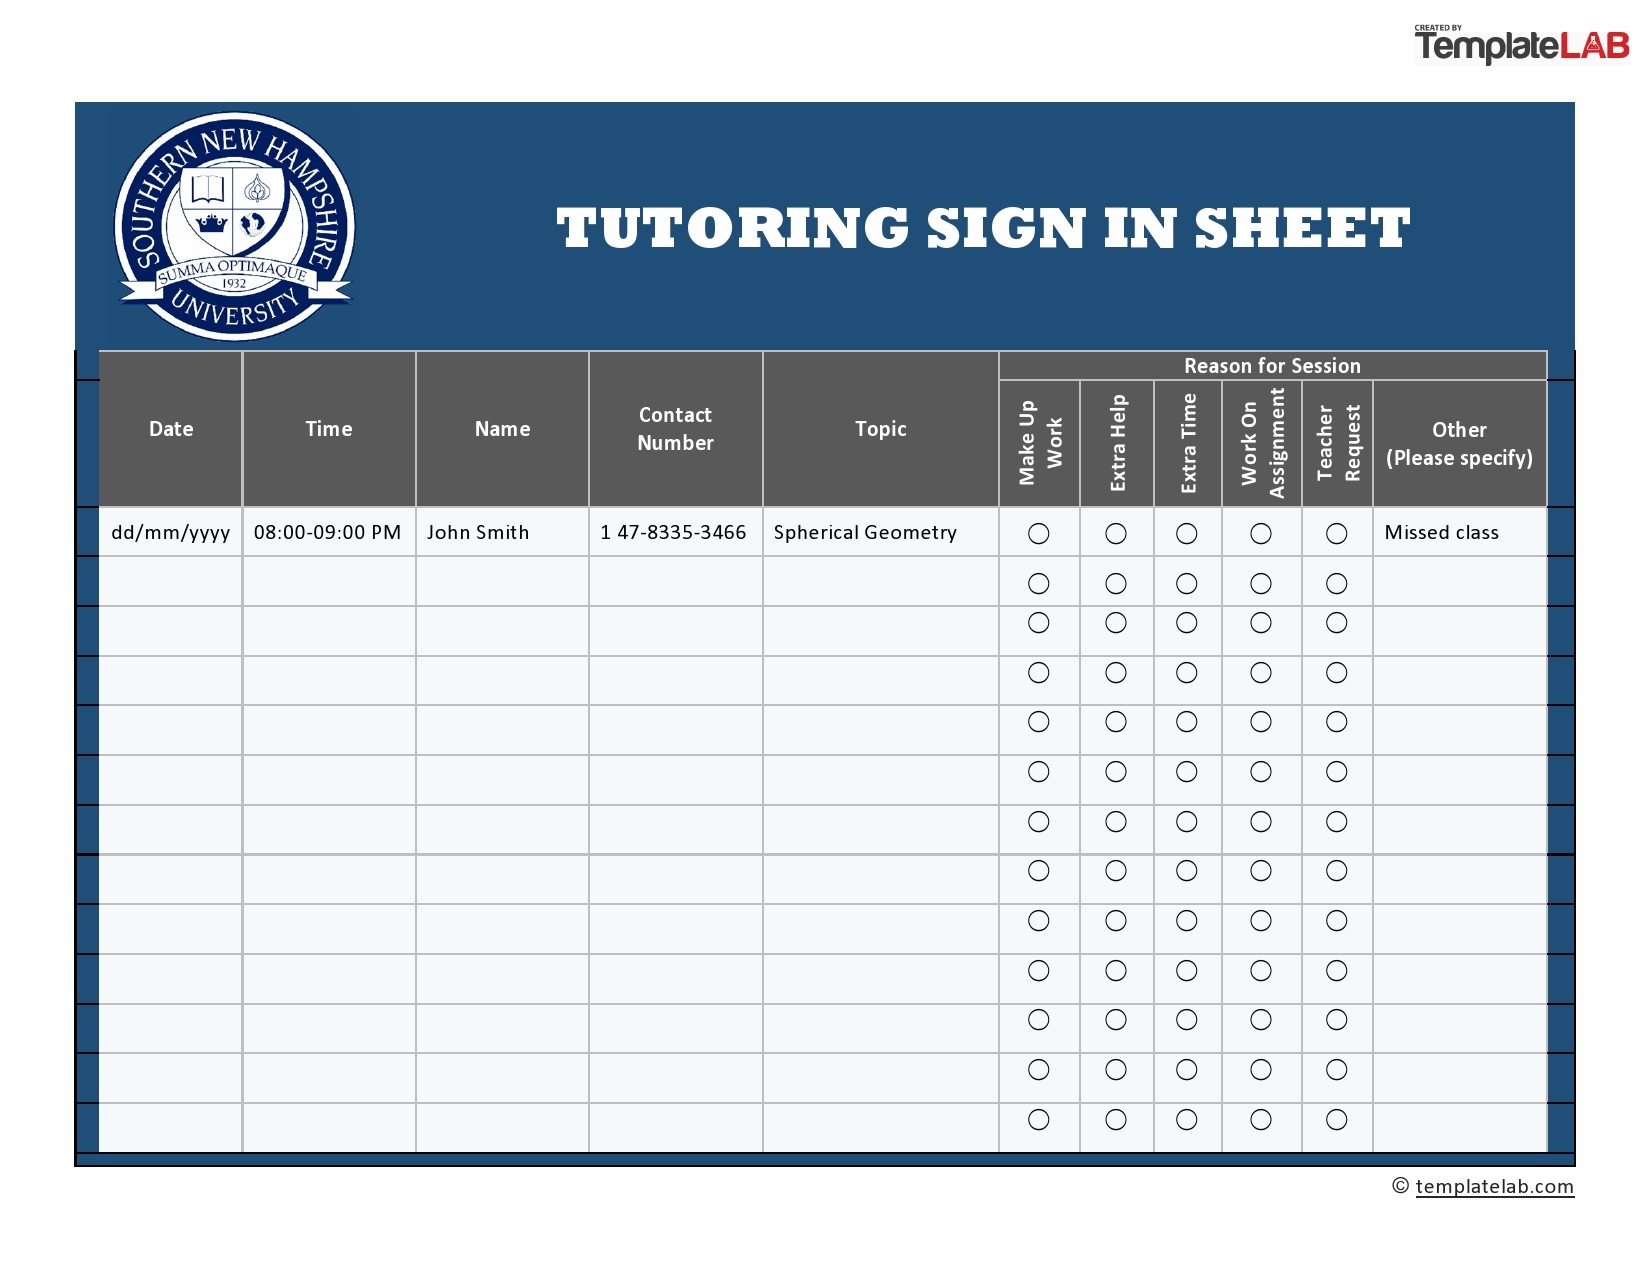 40-sign-up-sheet-sign-in-sheet-templates-word-excel